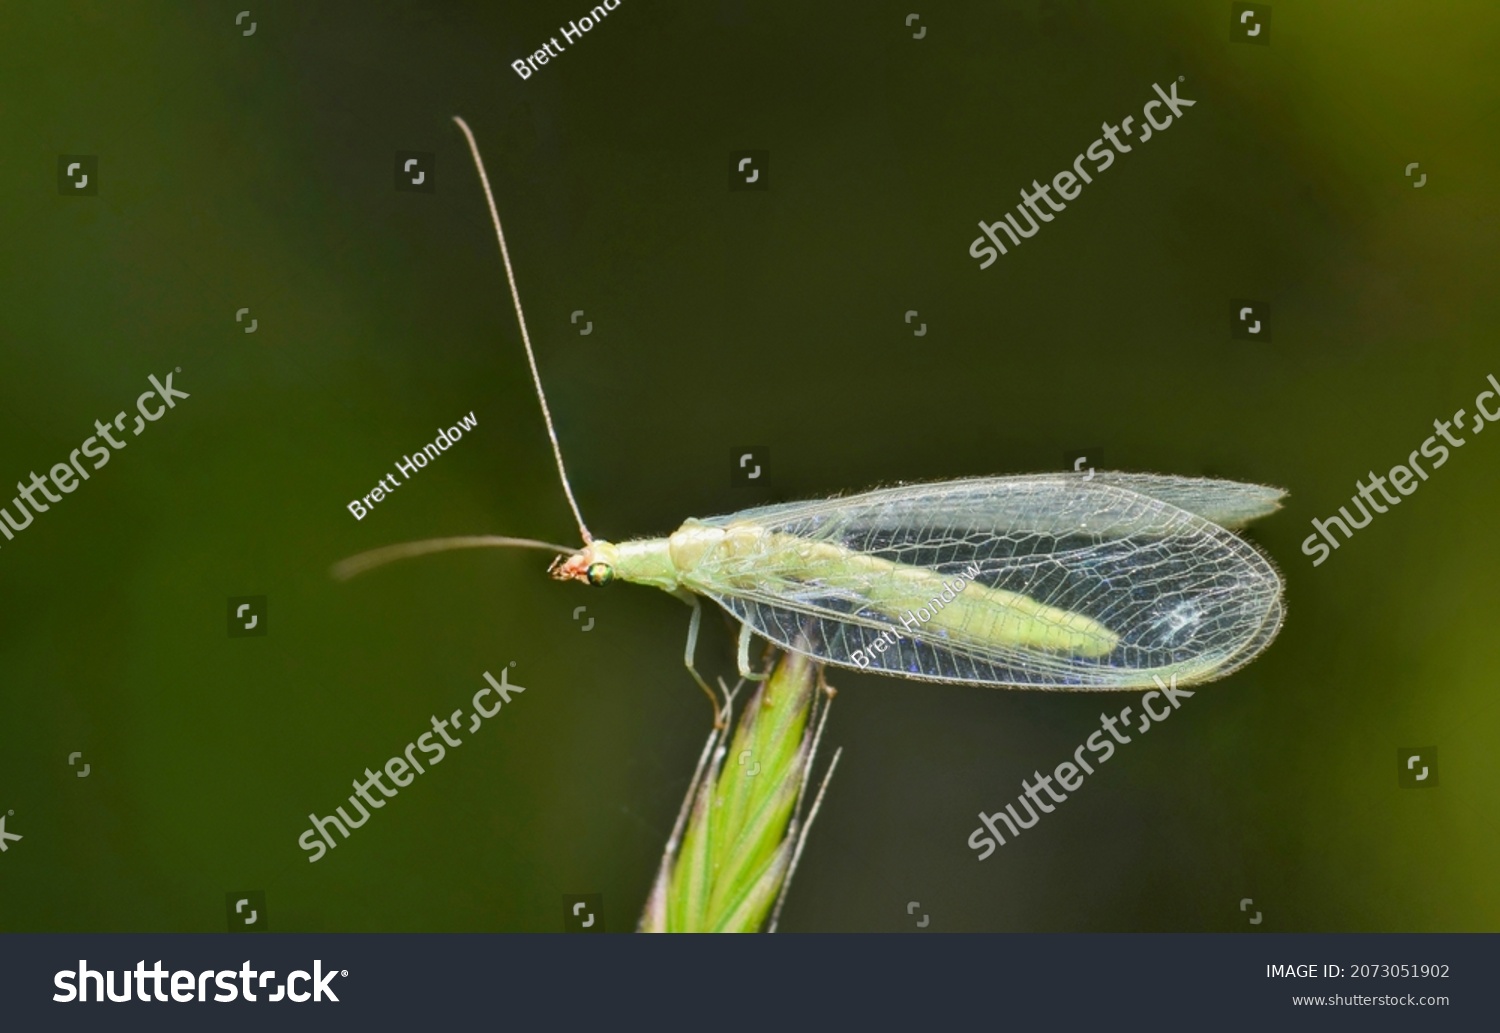 Adult Green Lacewing on a grass stalk in Houston, TX. Beneficial creatures that are natural predators of other insect pests. #2073051902